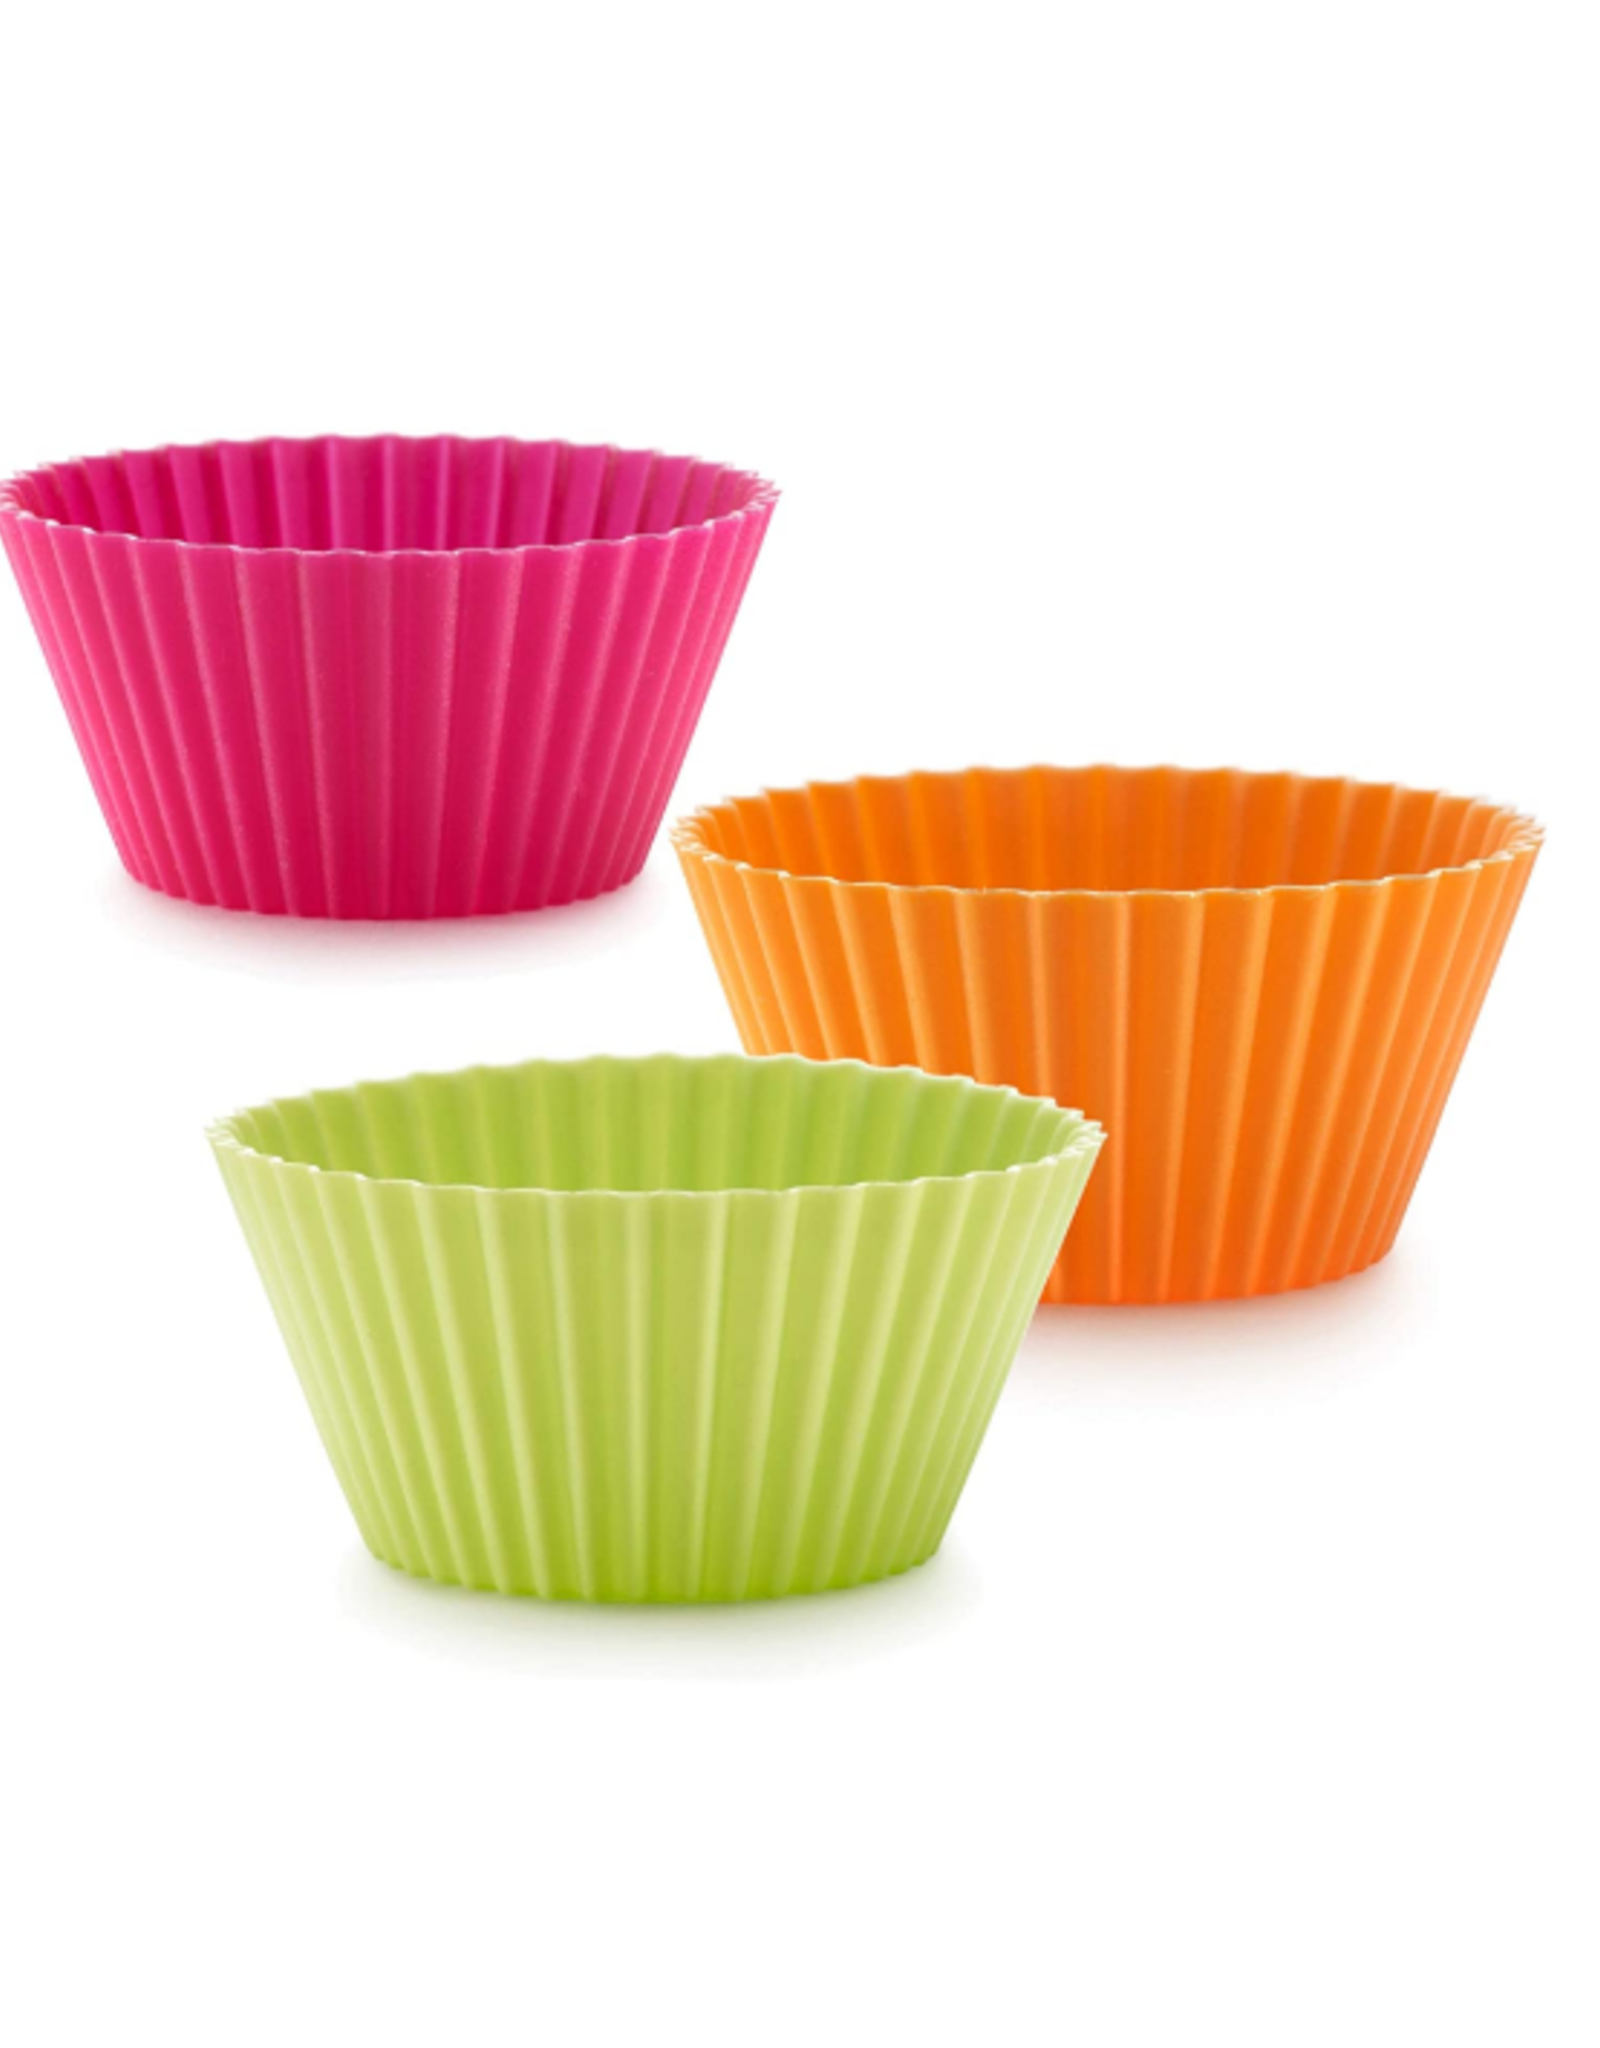 Lekue Silicone Muffin Cups, 12 asst.